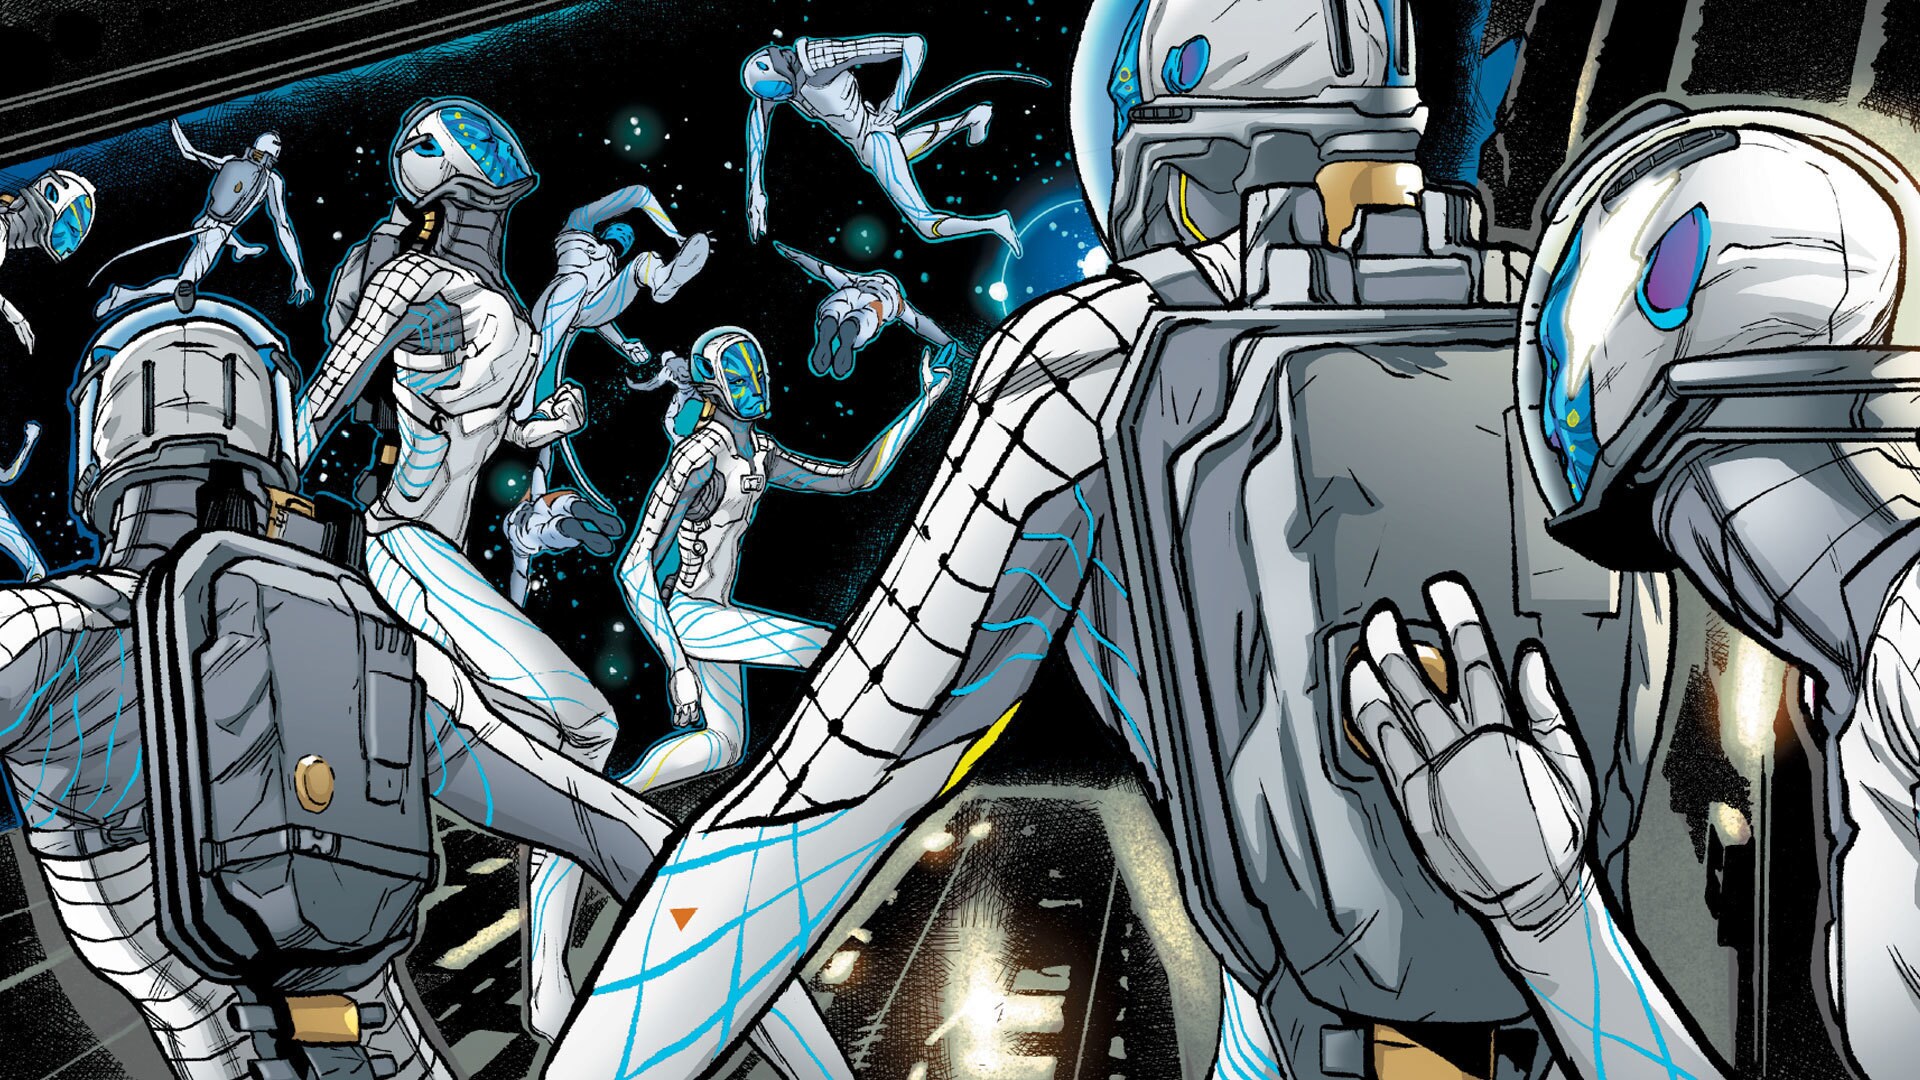 Comic book image of Na'vi in space suits.